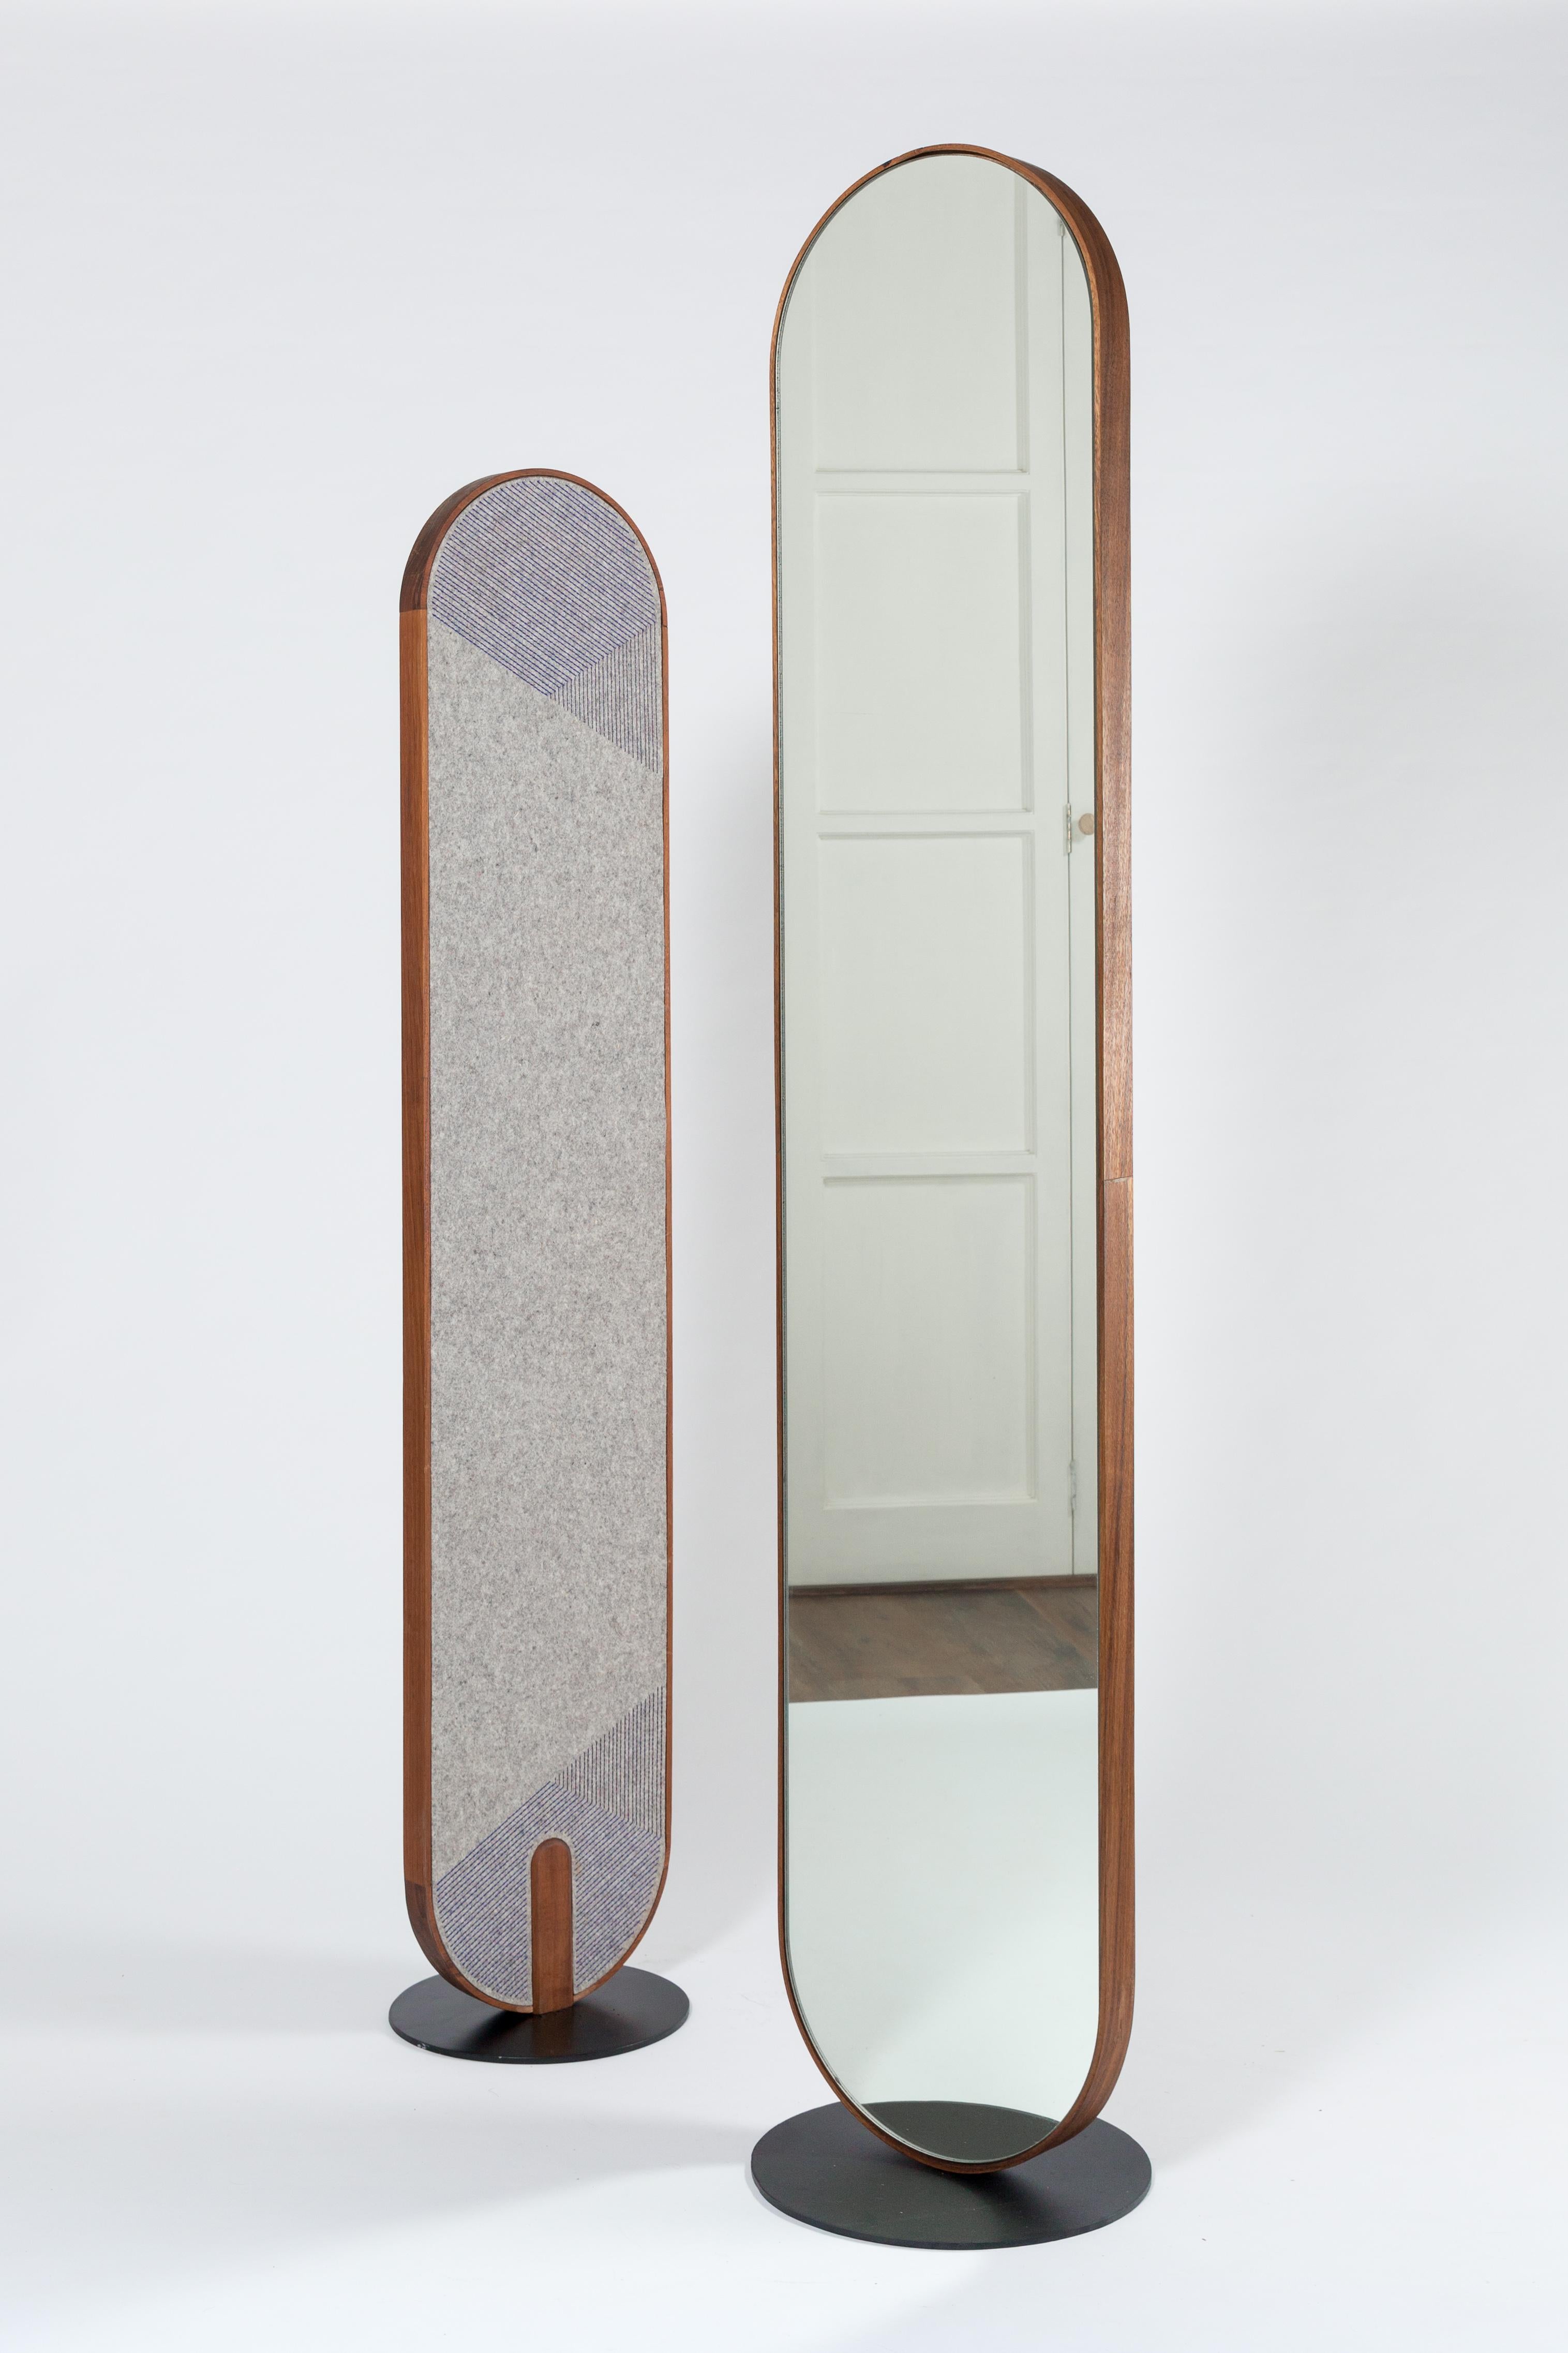 Perspectiva mirror by Colección Estudio
Dimensions: D 35 x W 35 x H 175 cm
Materials: oak wood
Also available in ebonized oak wood and tzalam wood.

Collection 02, intends to improve our relationship with the spaces we live in, through the